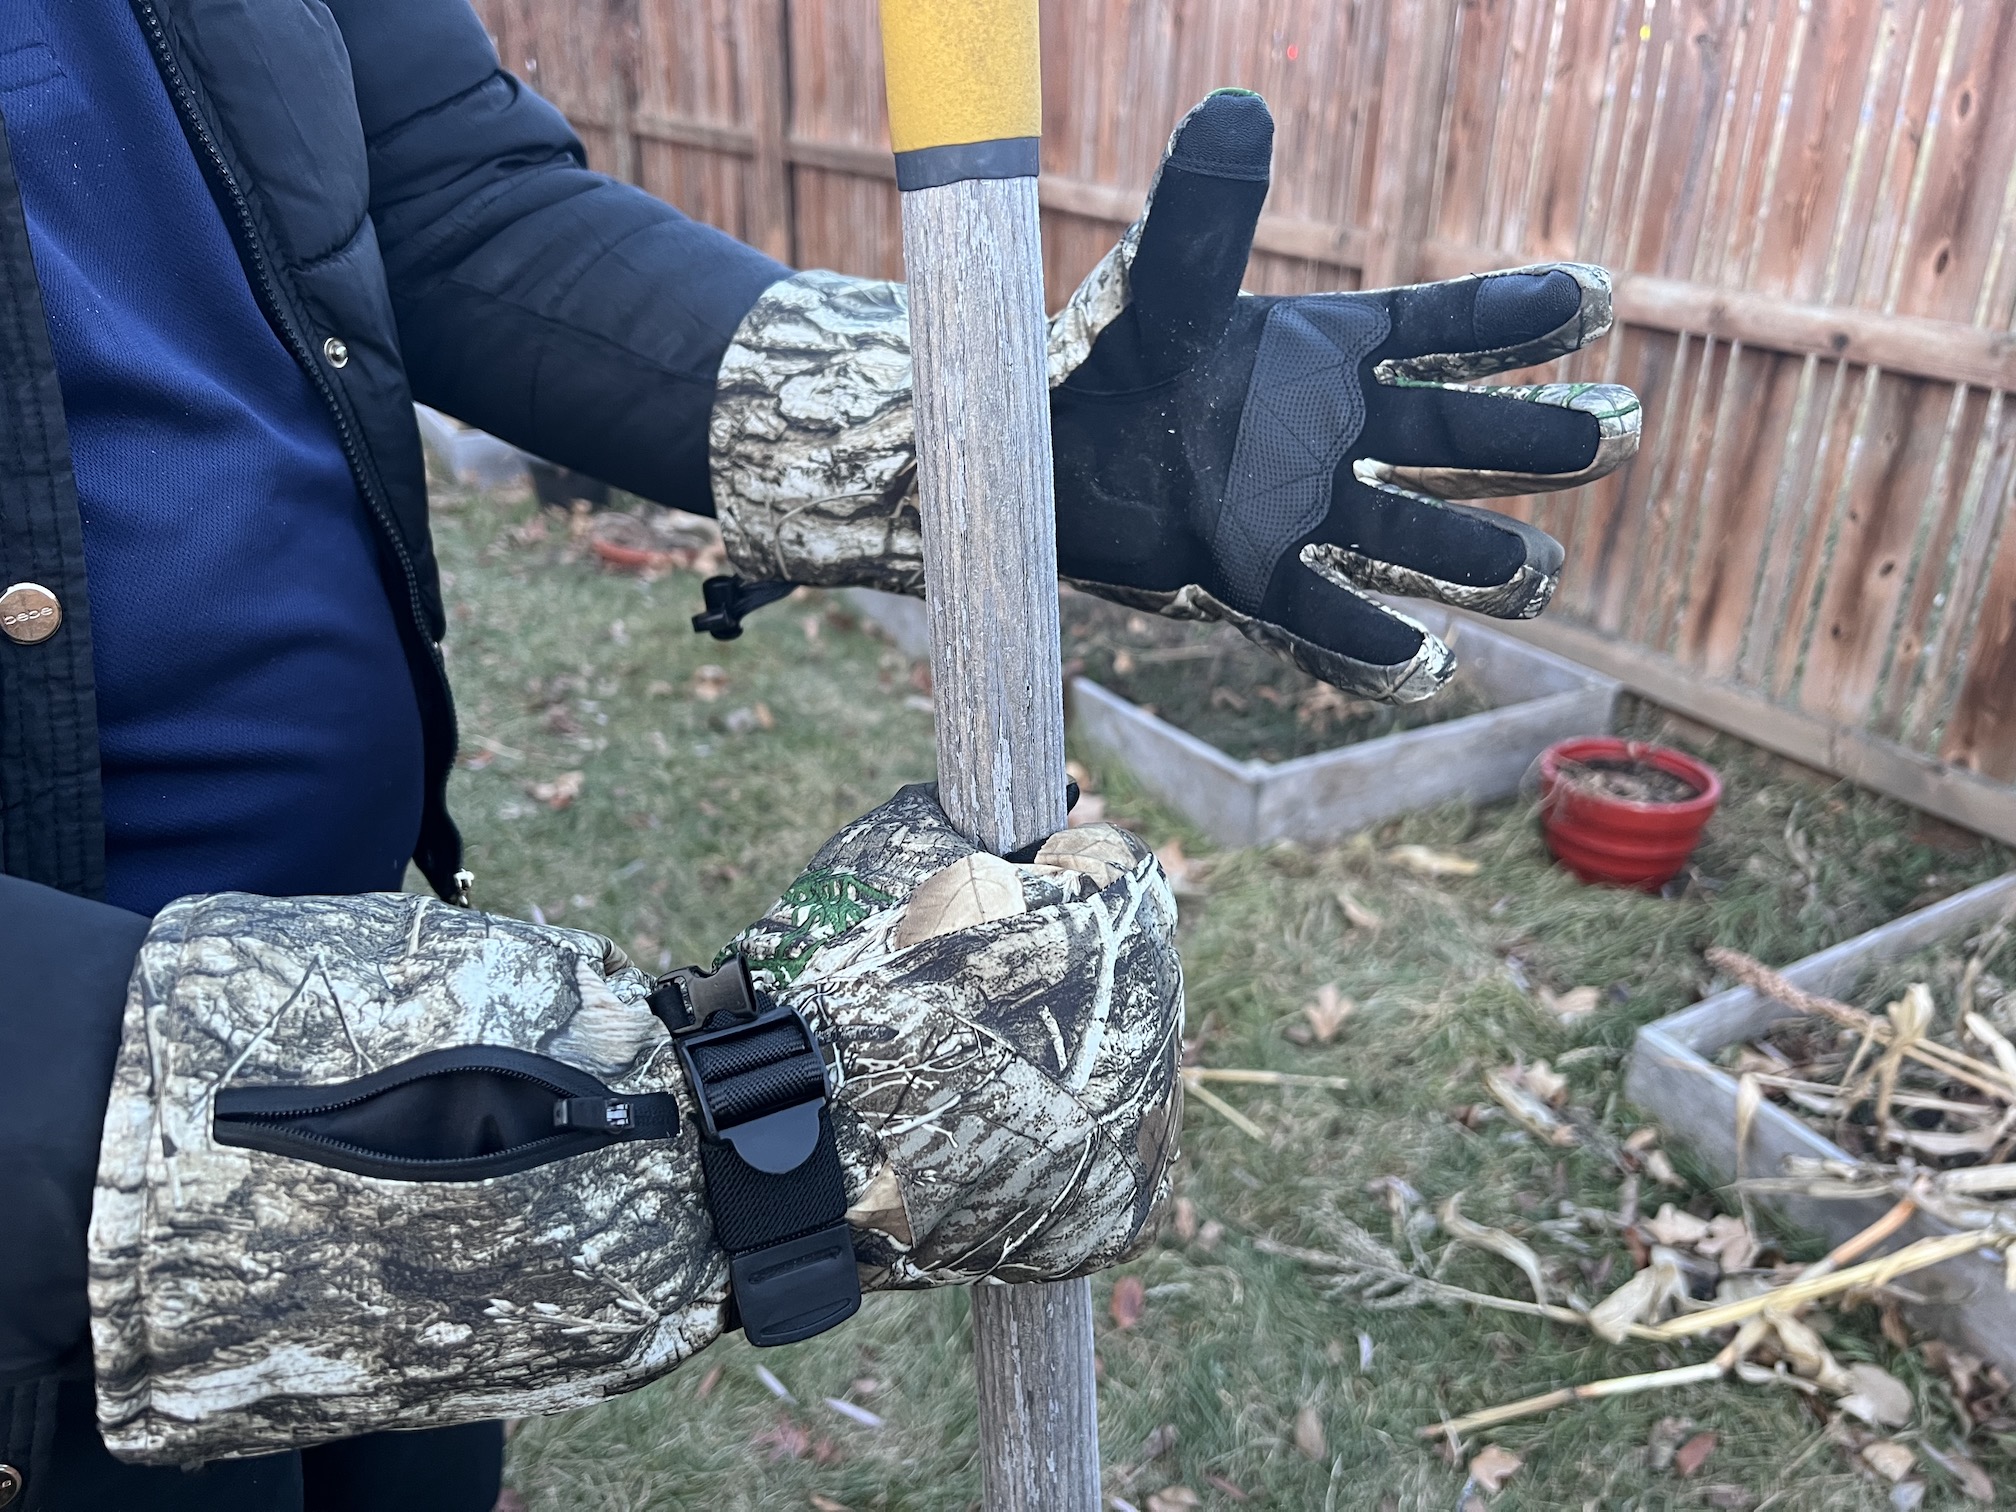 A person wearing heated gloves while grabbing a tool outside